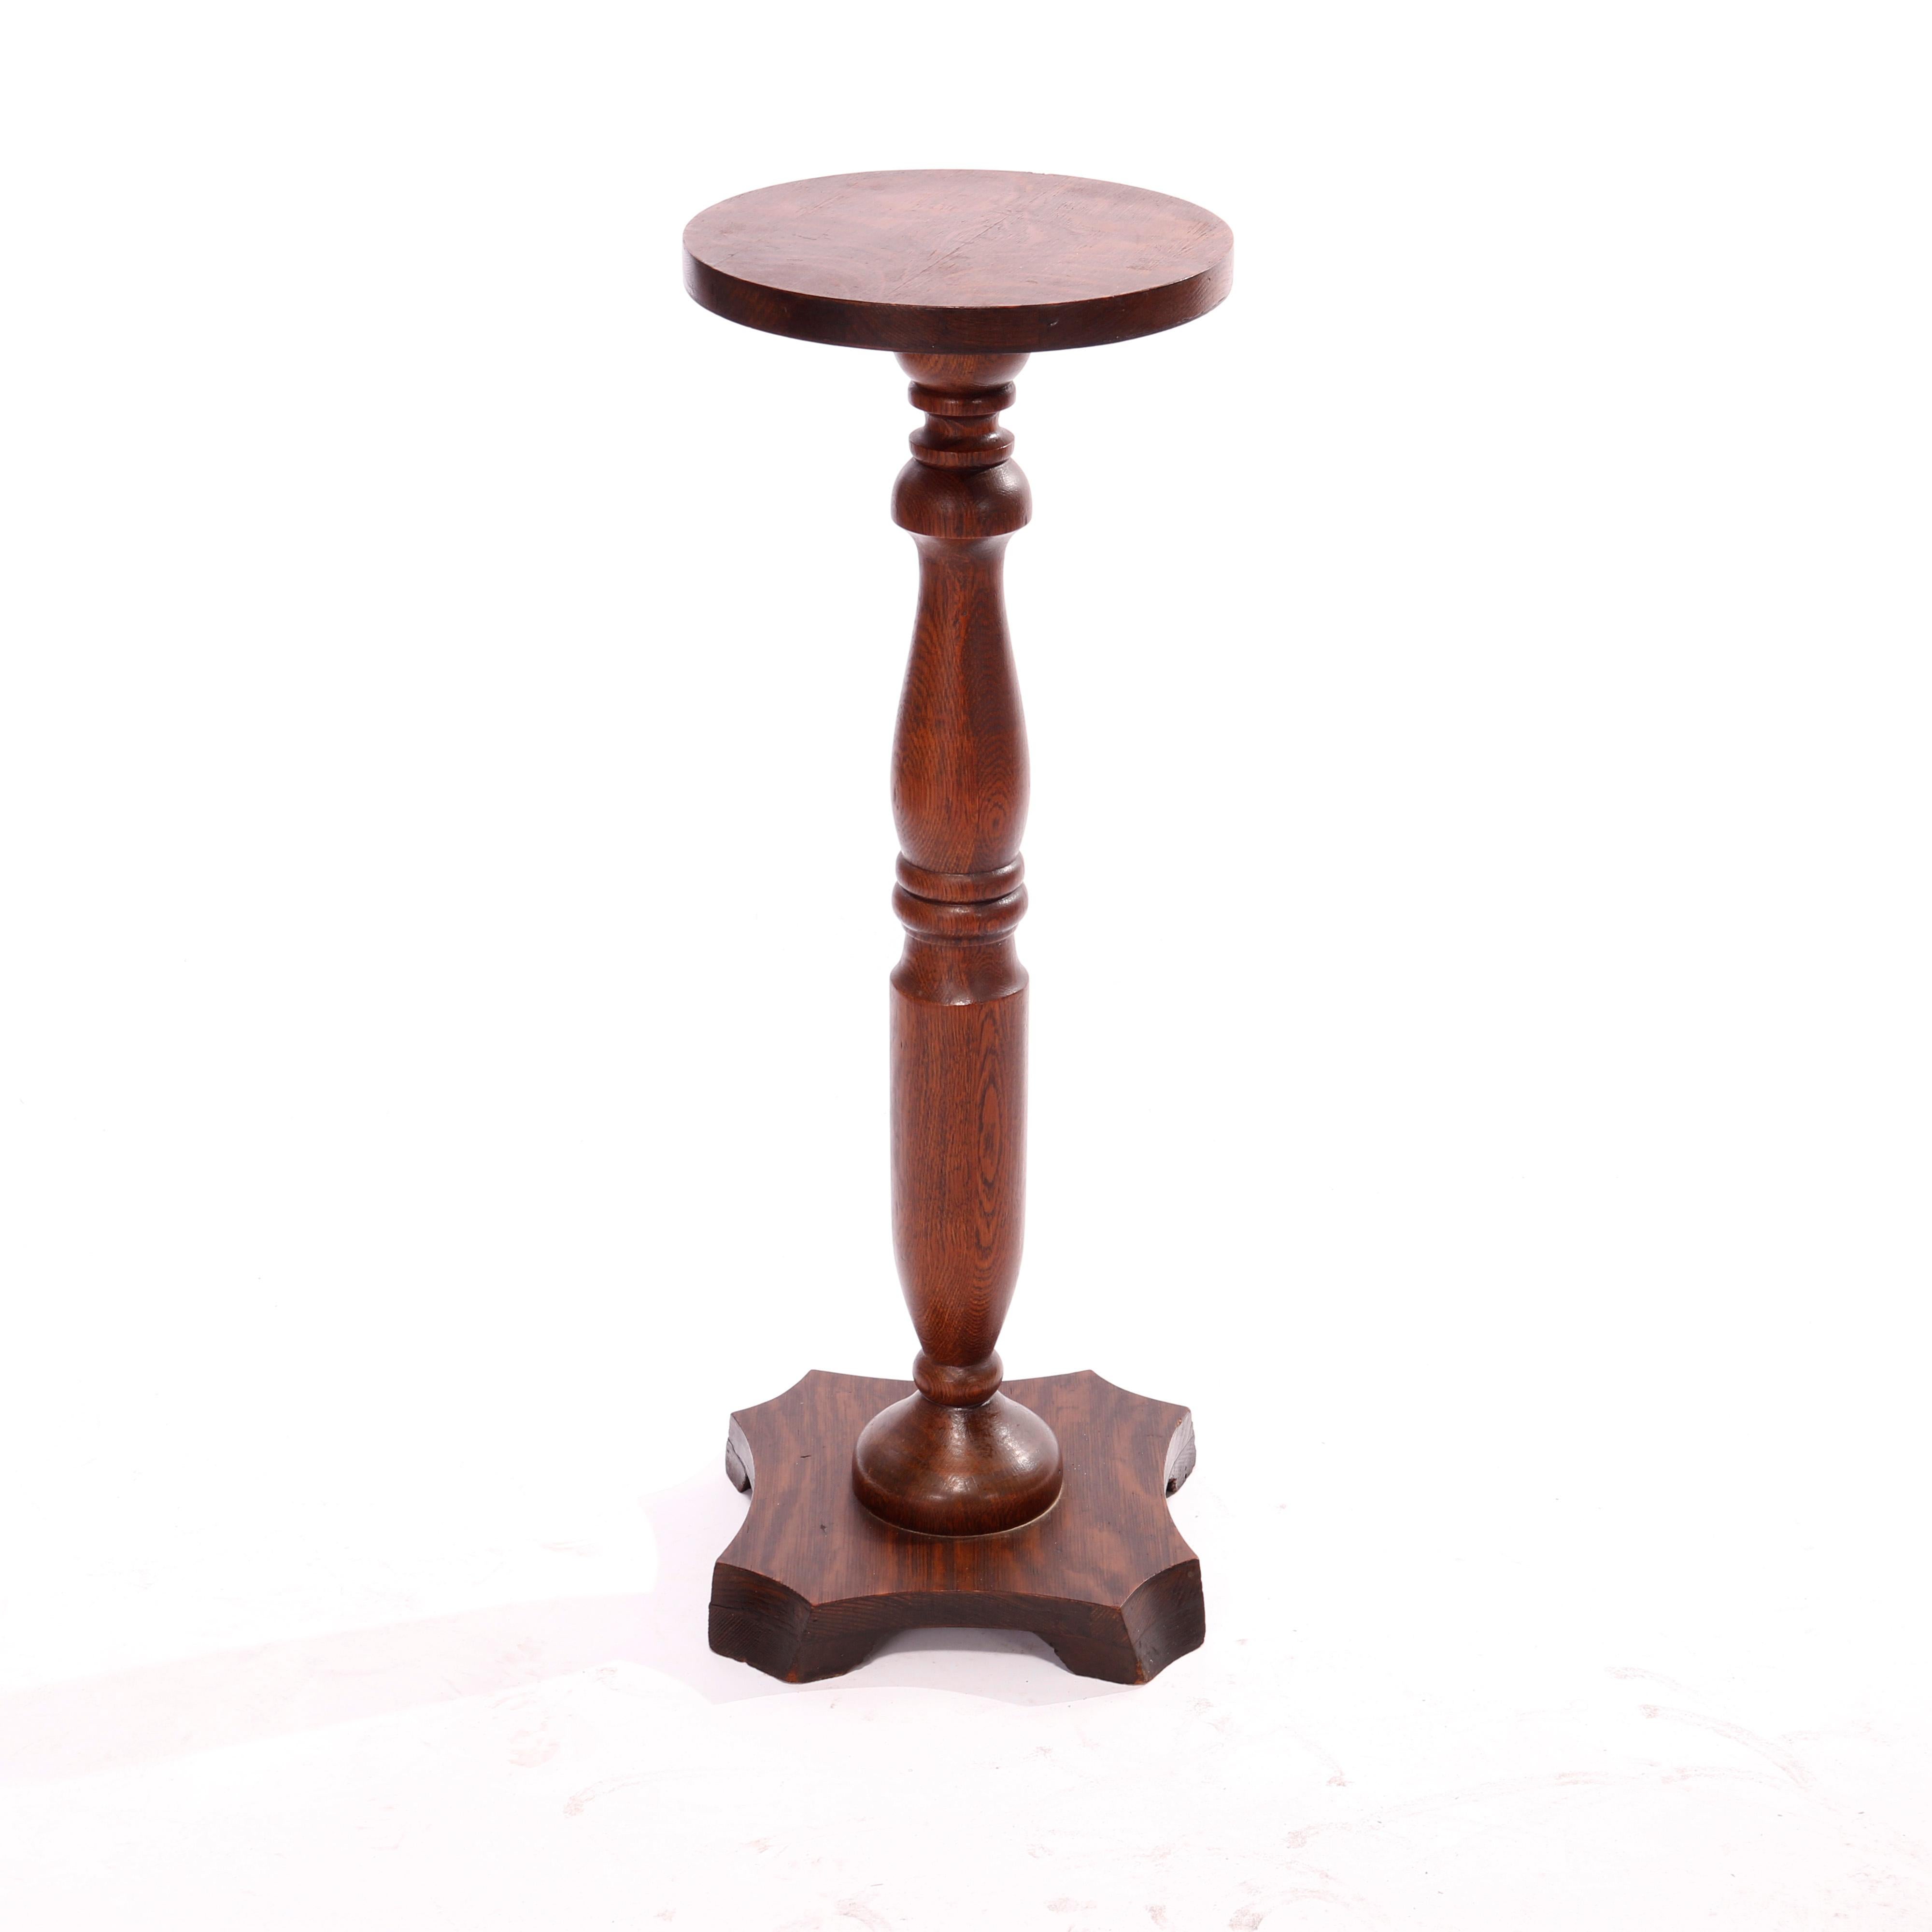 An antique Arts & Crafts pedestal offers oak construction with round display over turned balustrade column, c1910

Measures - 34.25'' H x 14.75'' W x 14.75'' D.

Catalogue Note: Ask about DISCOUNTED DELIVERY RATES available to most regions within